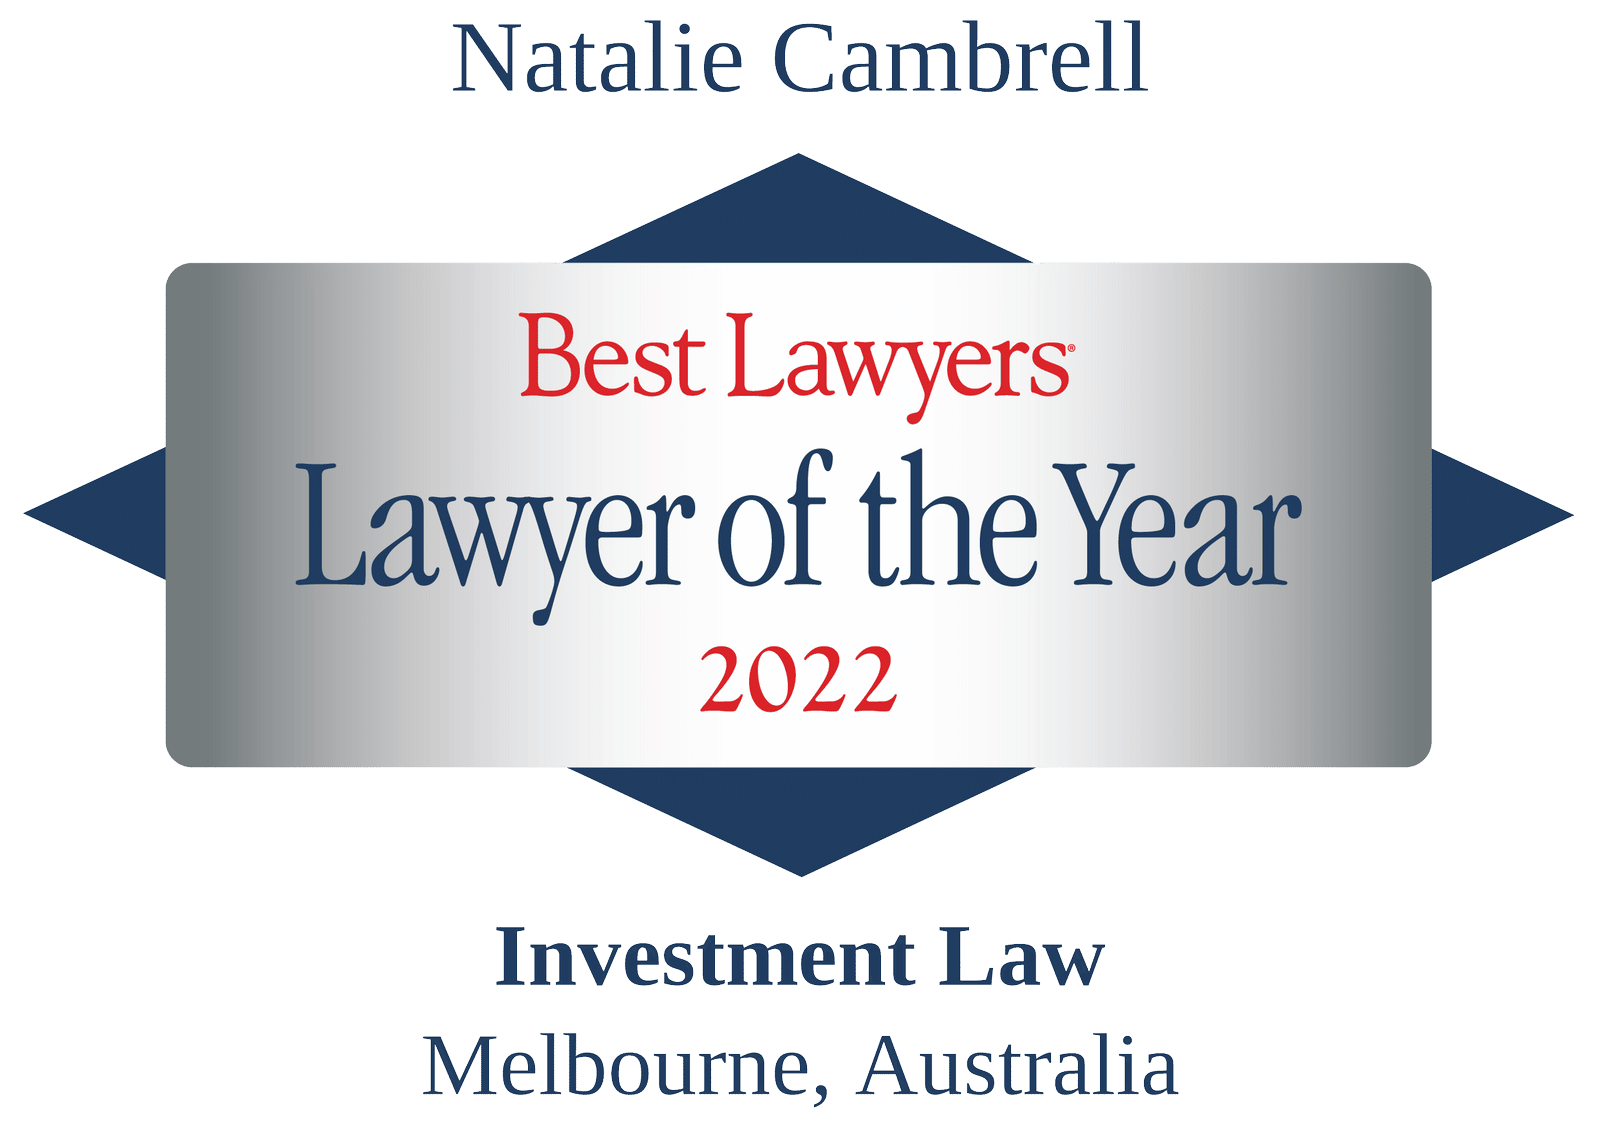 KHQ Lawyers - Best Lawyers 2022 - Natalie Cambrell Lawyer of the Year - Investment Law